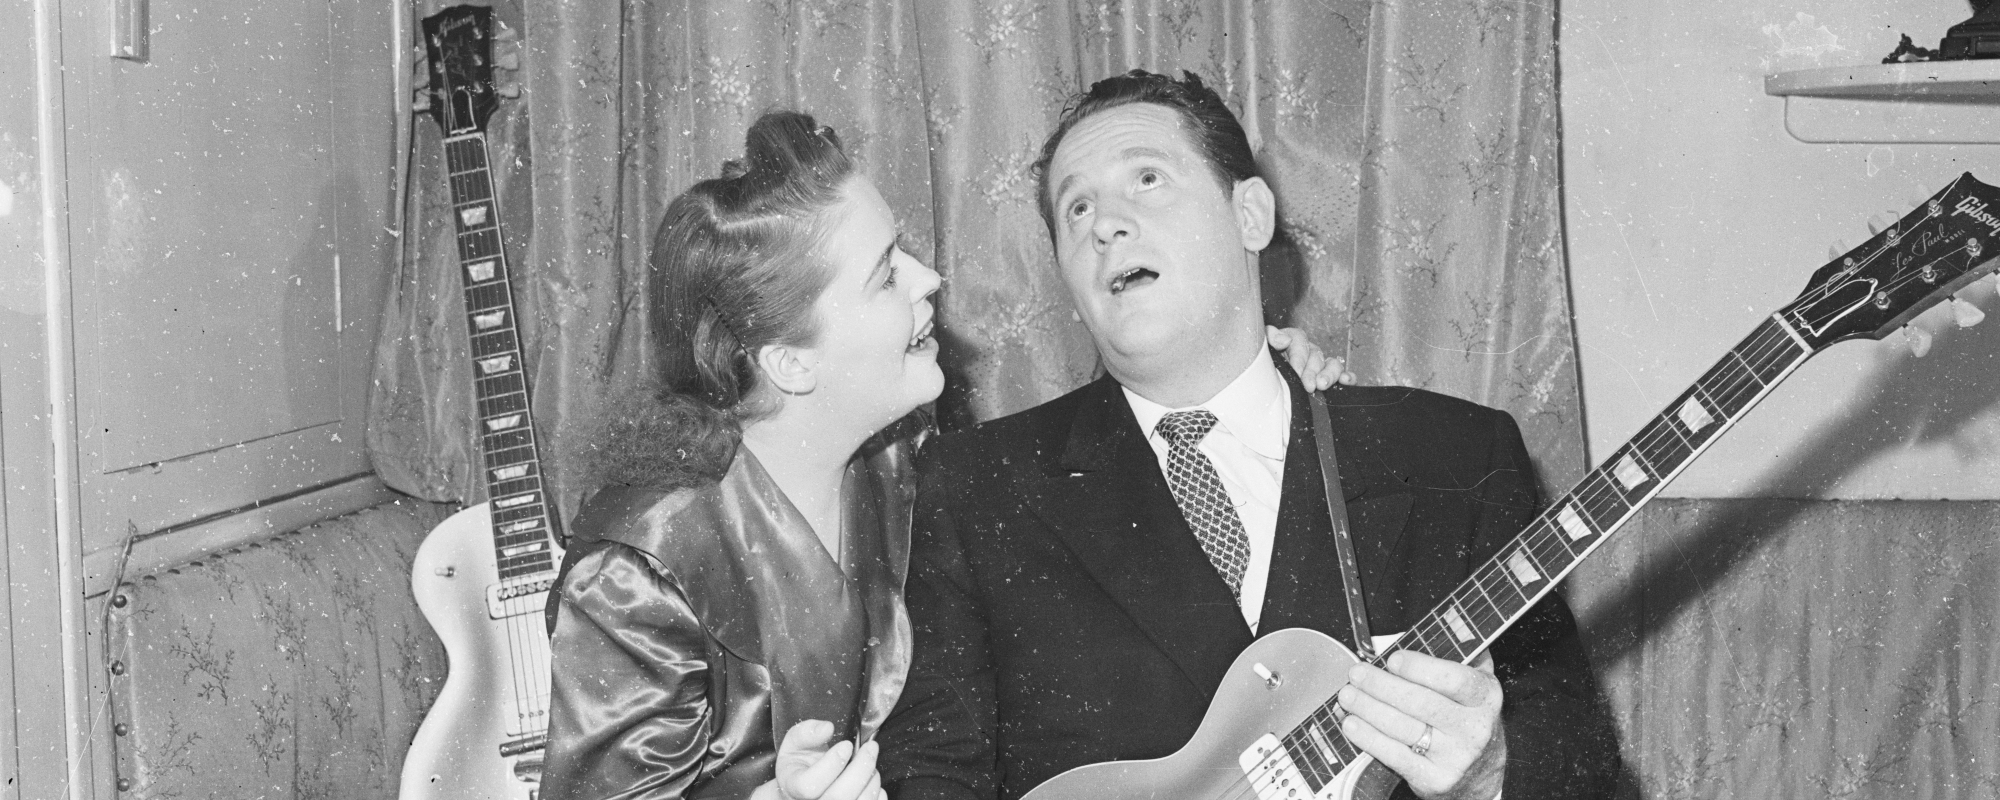 Did You Know He Invented Overdubbing? 5 Fascinating Facts About Les Paul